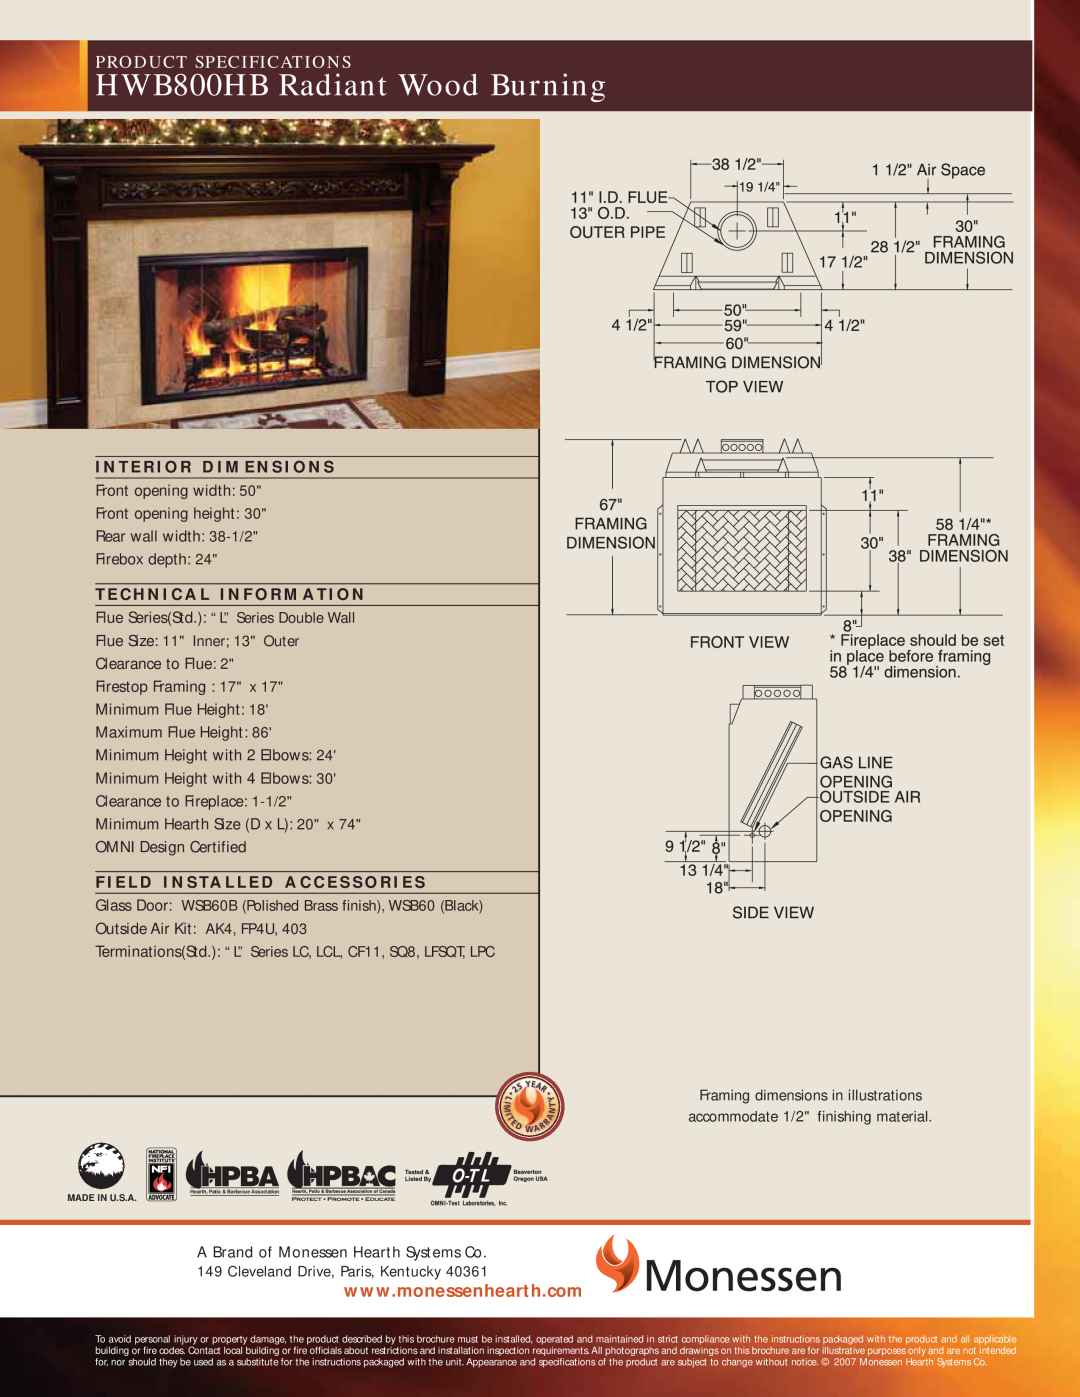 Monessen Hearth brochure HWB800HB Radiant Wood Burning, Product Specifications 